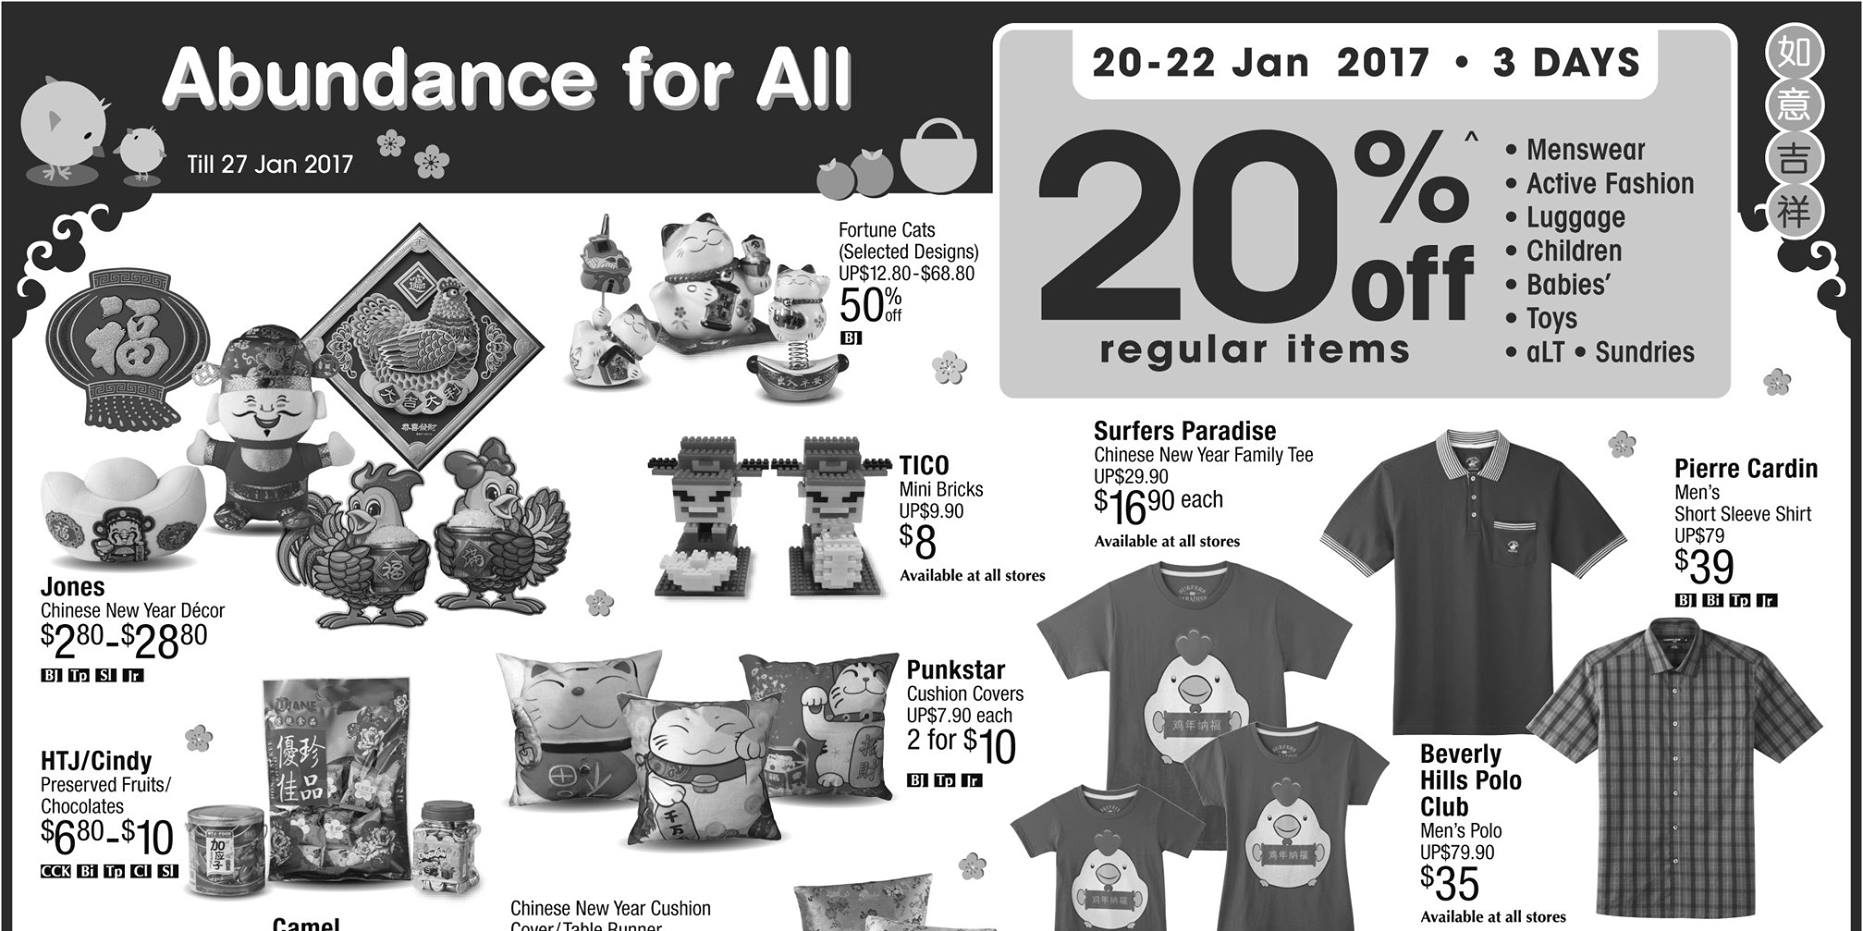 BHG Singapore Chinese New Year Last Minute Purchases Up to 20% Off Promotion 20-22 Jan 2017